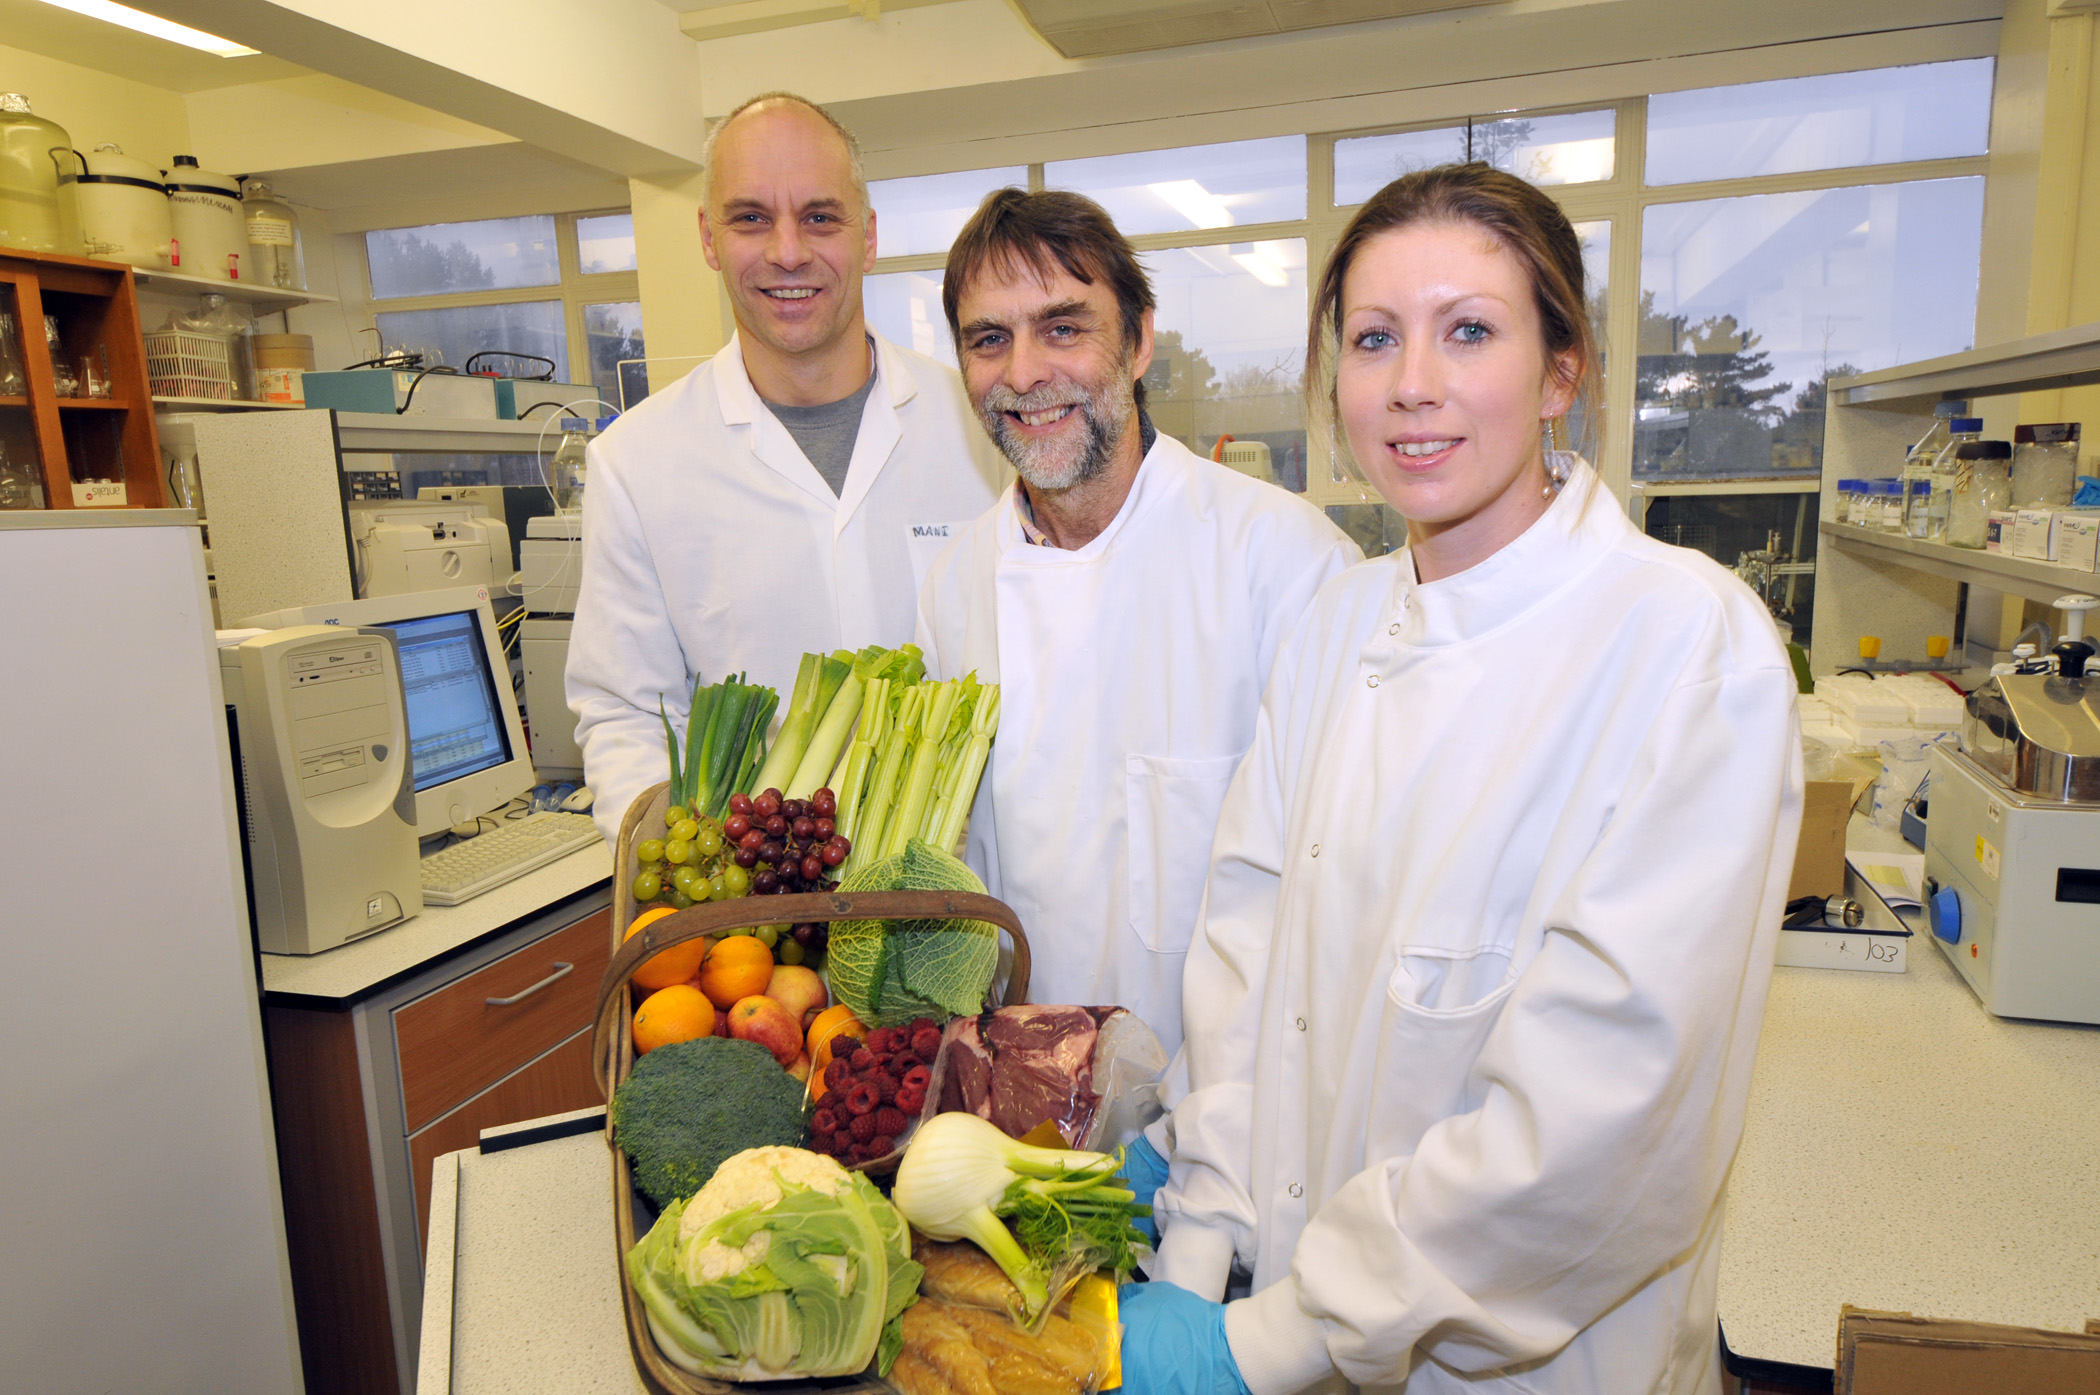 Aberystwyth University Future Foods Project Scientists, from left to right: Dr Manfred Beckmann, Professor John Draper and Dr Amanda Lloyd